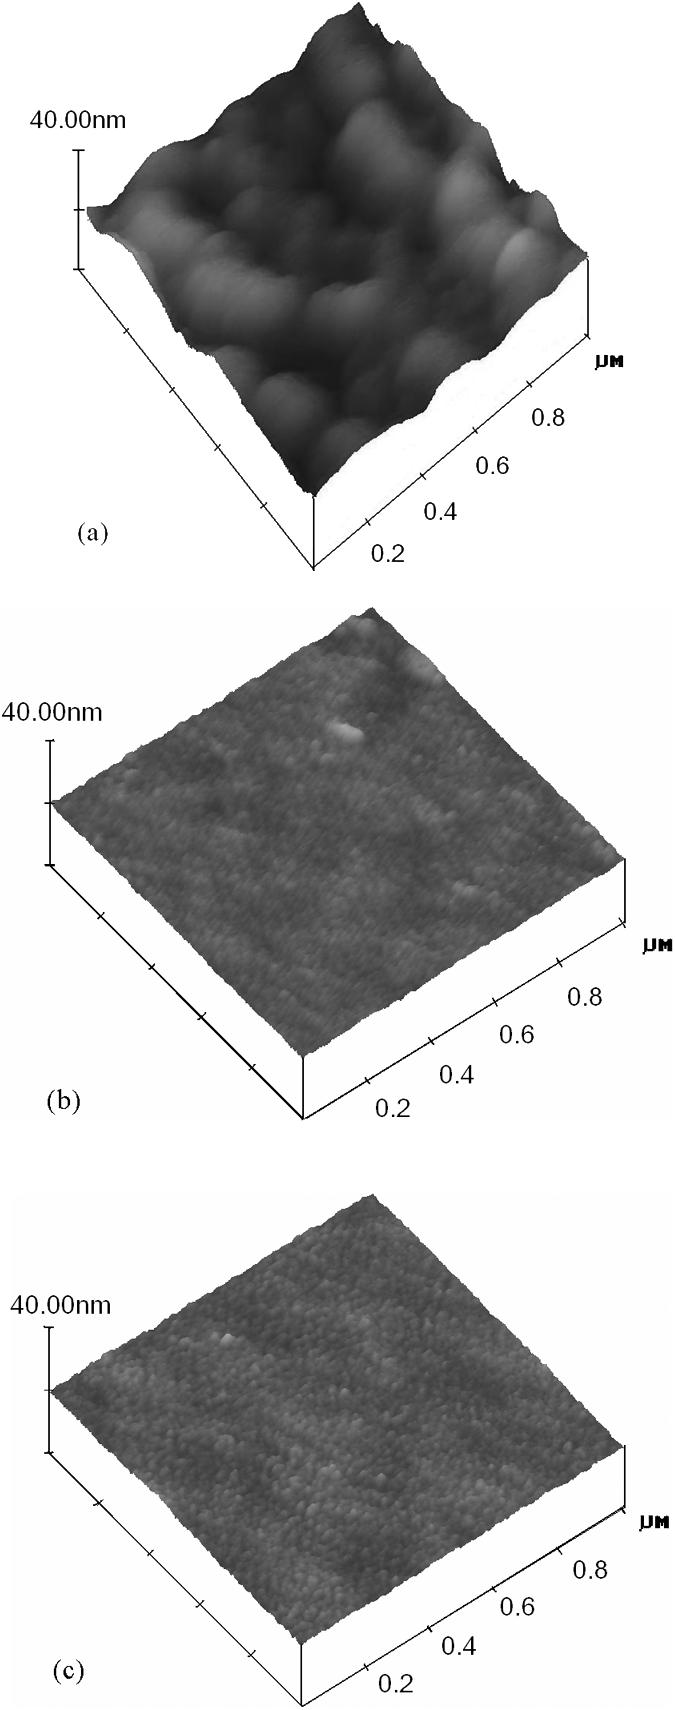 Fig. 2. AFM images of: (a) bare PET; (b) PET with an acrylic layer; and (c) a 130-nm-thick ITO film on an acrylic-layer-coated PET. bare PET has an rms roughness of 6.0 0.1 nm.